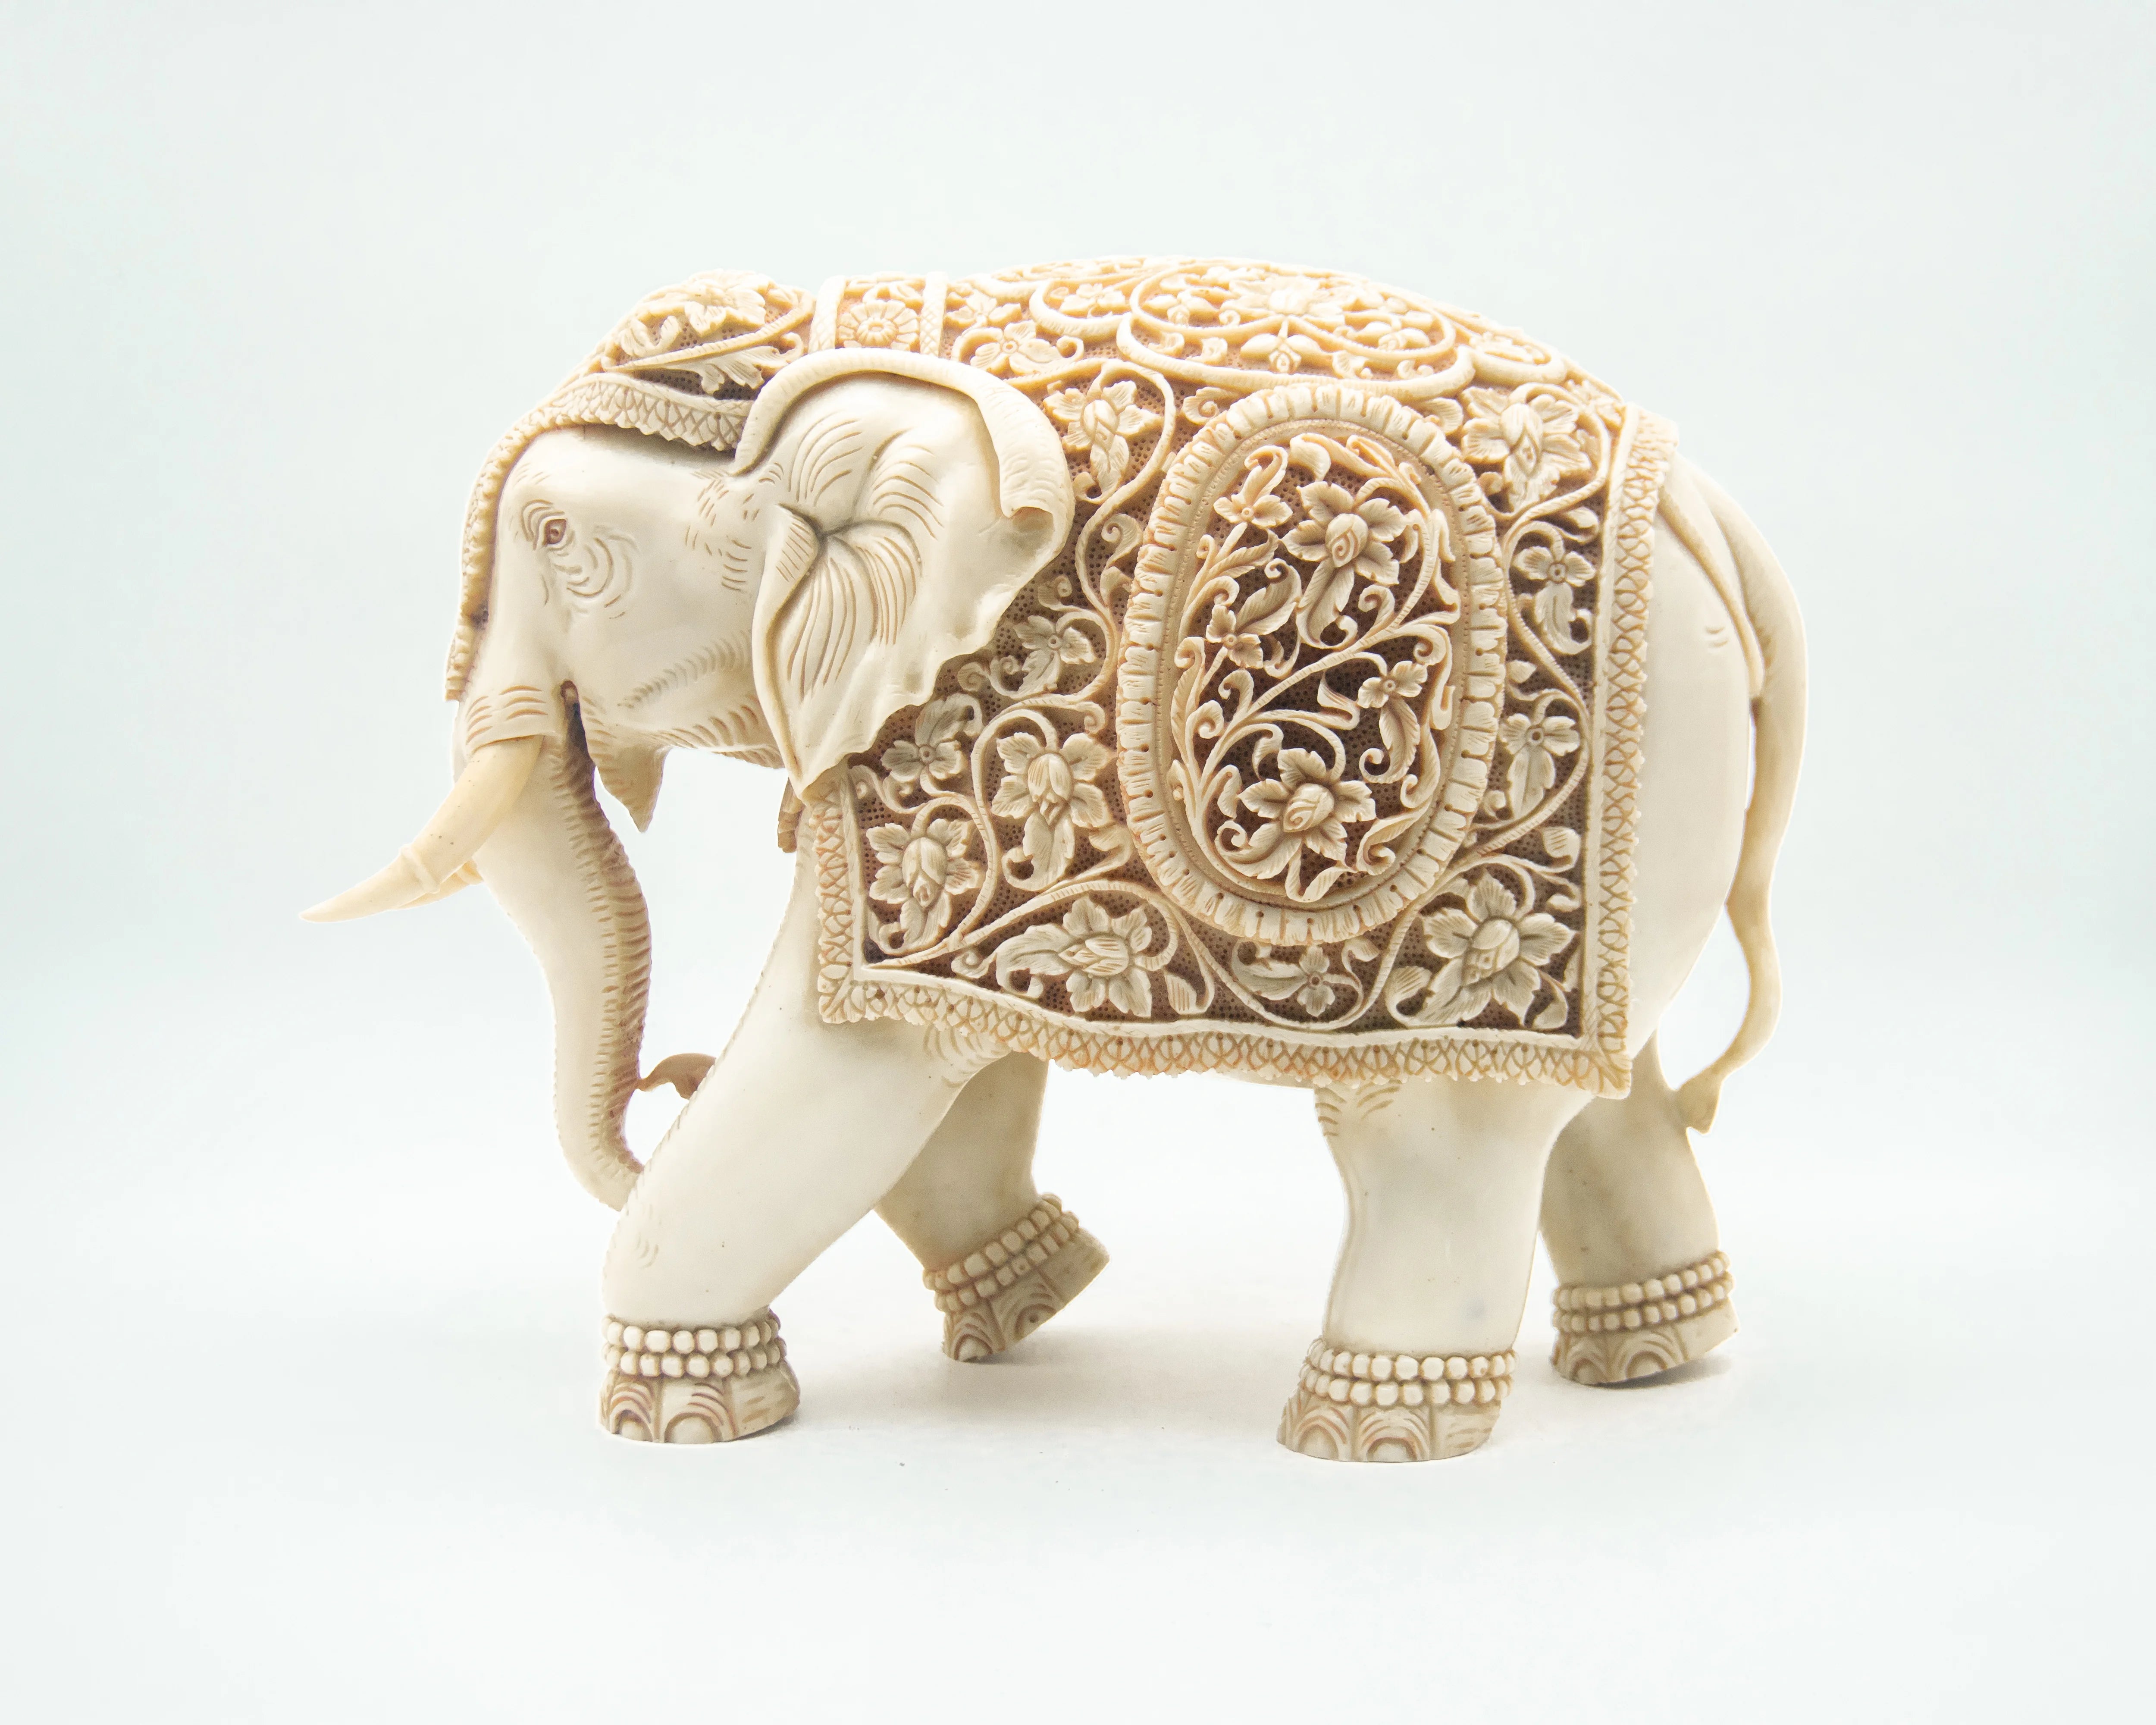 Hand-Carved-Resin-Elephant-Statue-Animal-Art-Figurine-for-Gift